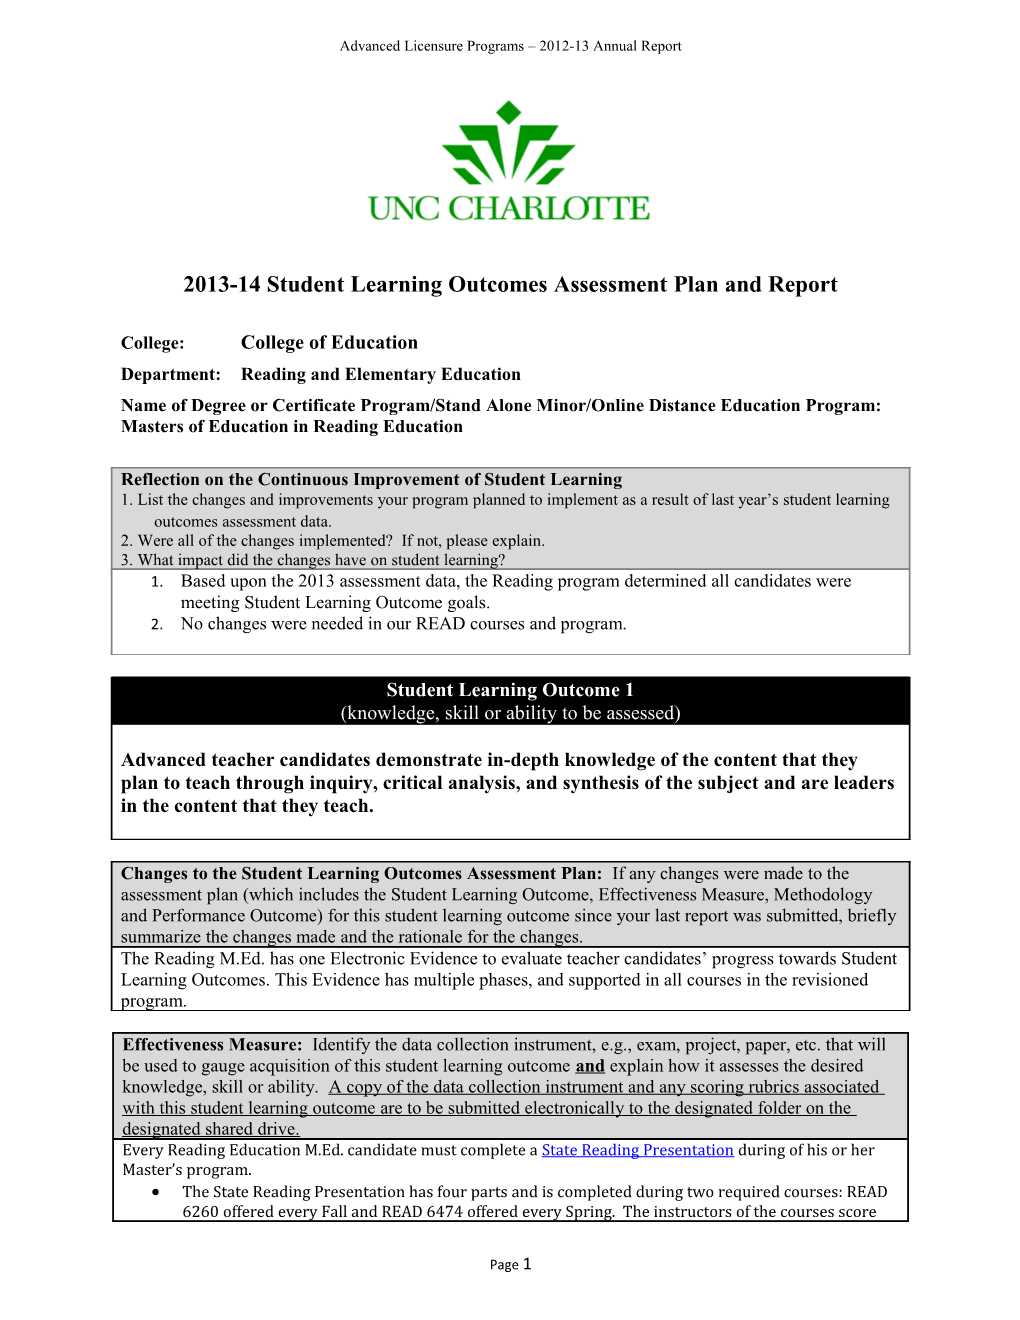 2013-14 Student Learning Outcomes Assessment Plan and Report